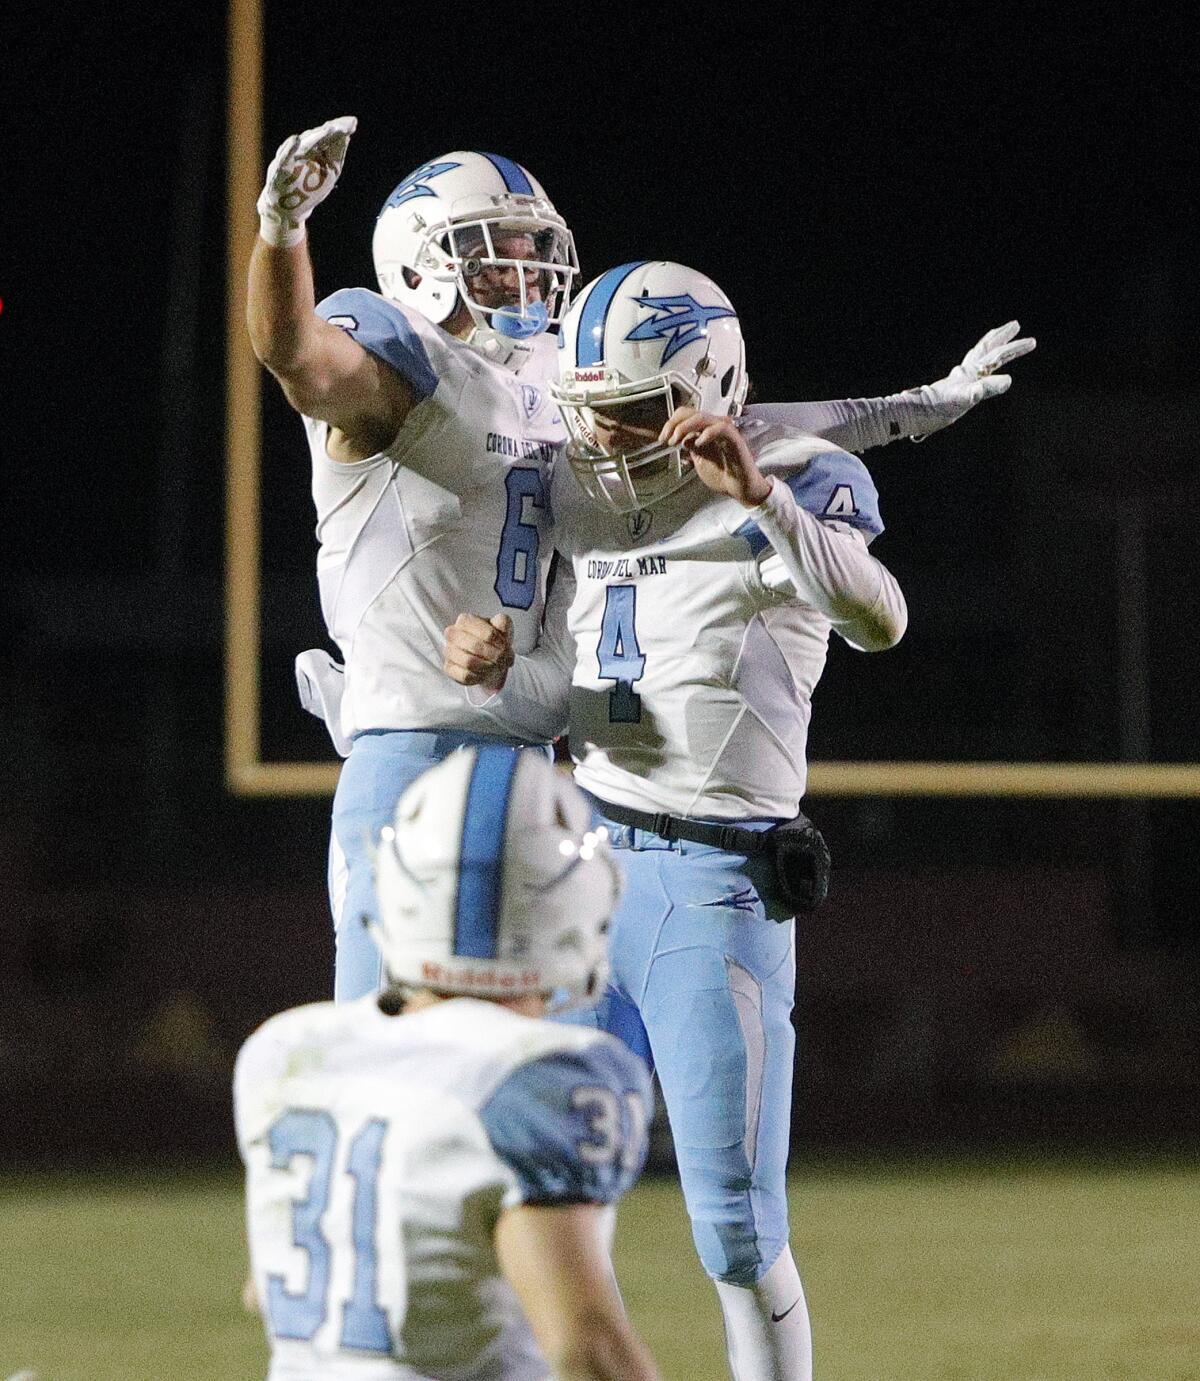 Corona del Mar's John Humphreys (6) jumps into quarterback Ethan Garbers after catching a 65-yard touchdown pass against Alemany in a CIF Southern Section Division 3 semifinal playoff game in Mission Hills on Nov. 22.